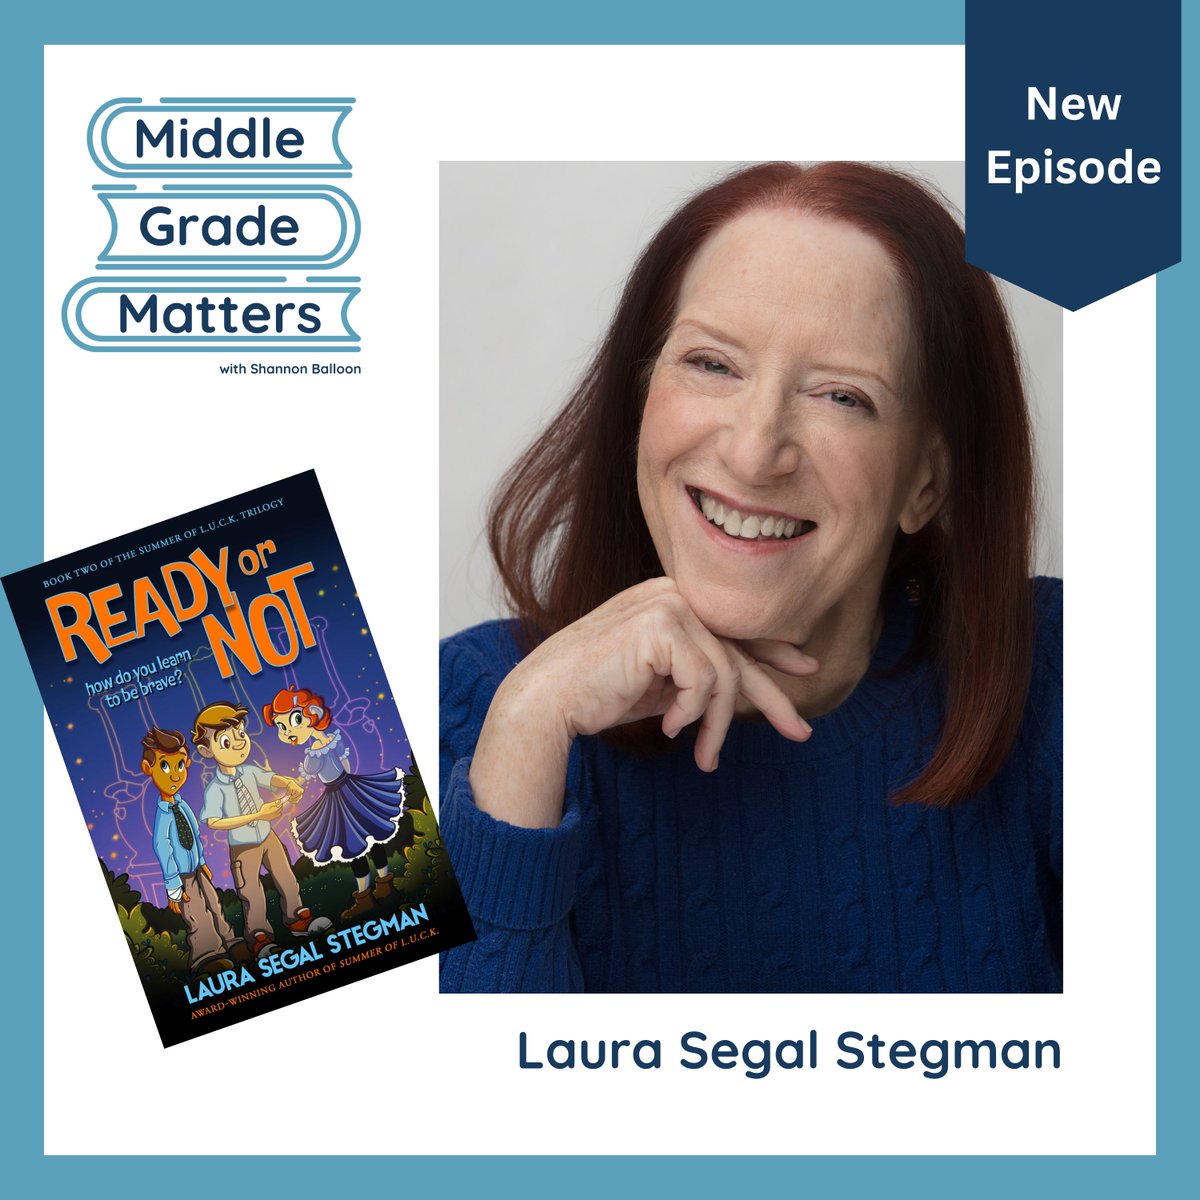 Two more episodes dropped today! Listen on Apple Podcasts, Spotify, or wherever you get your podcasts! (Links in bio) @LauraStegman

#middlegradematterspodcast #middlegrade #middlegradewriters #middlegradereaders